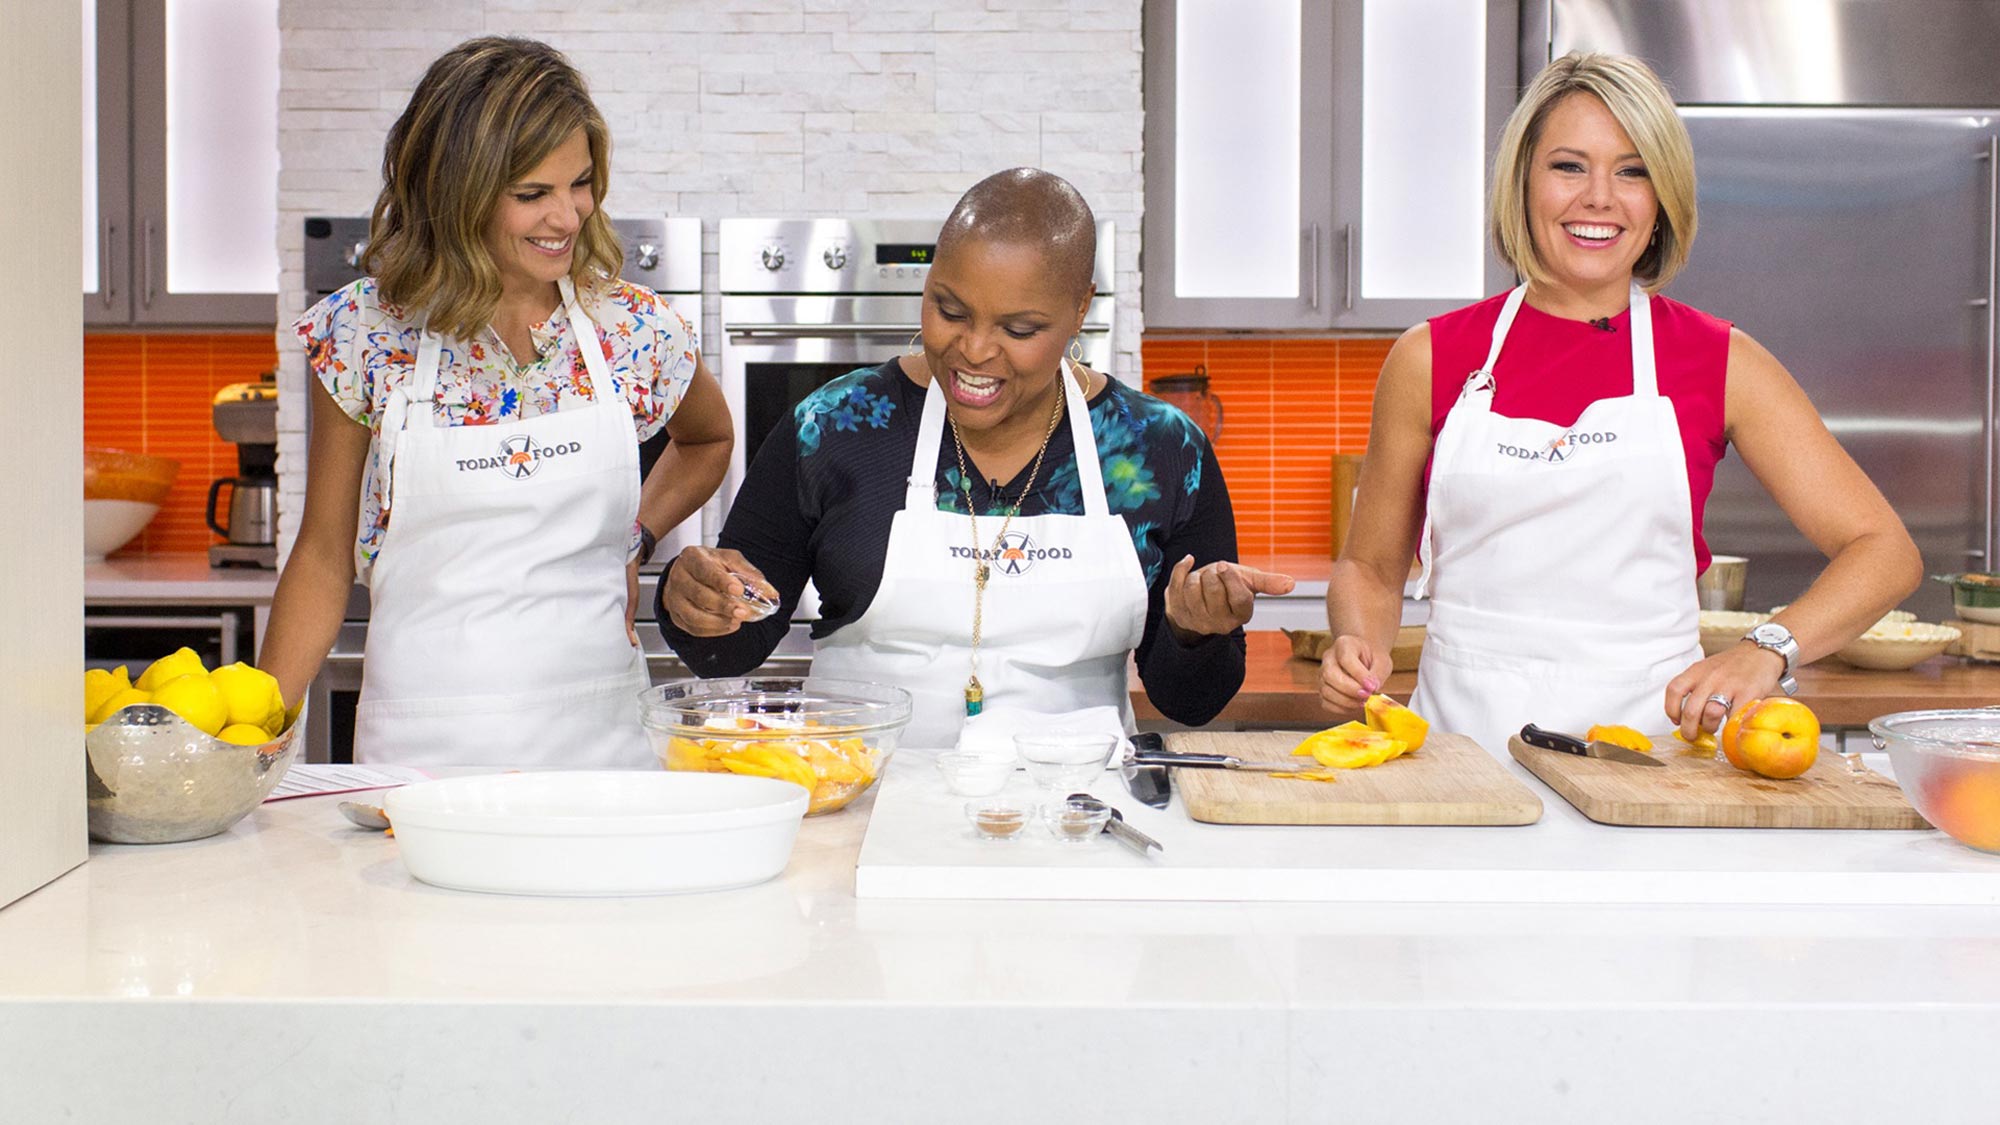 Photo of Tanya Holland with two hosts of NBC's "Today" show preparing a dish with peaches